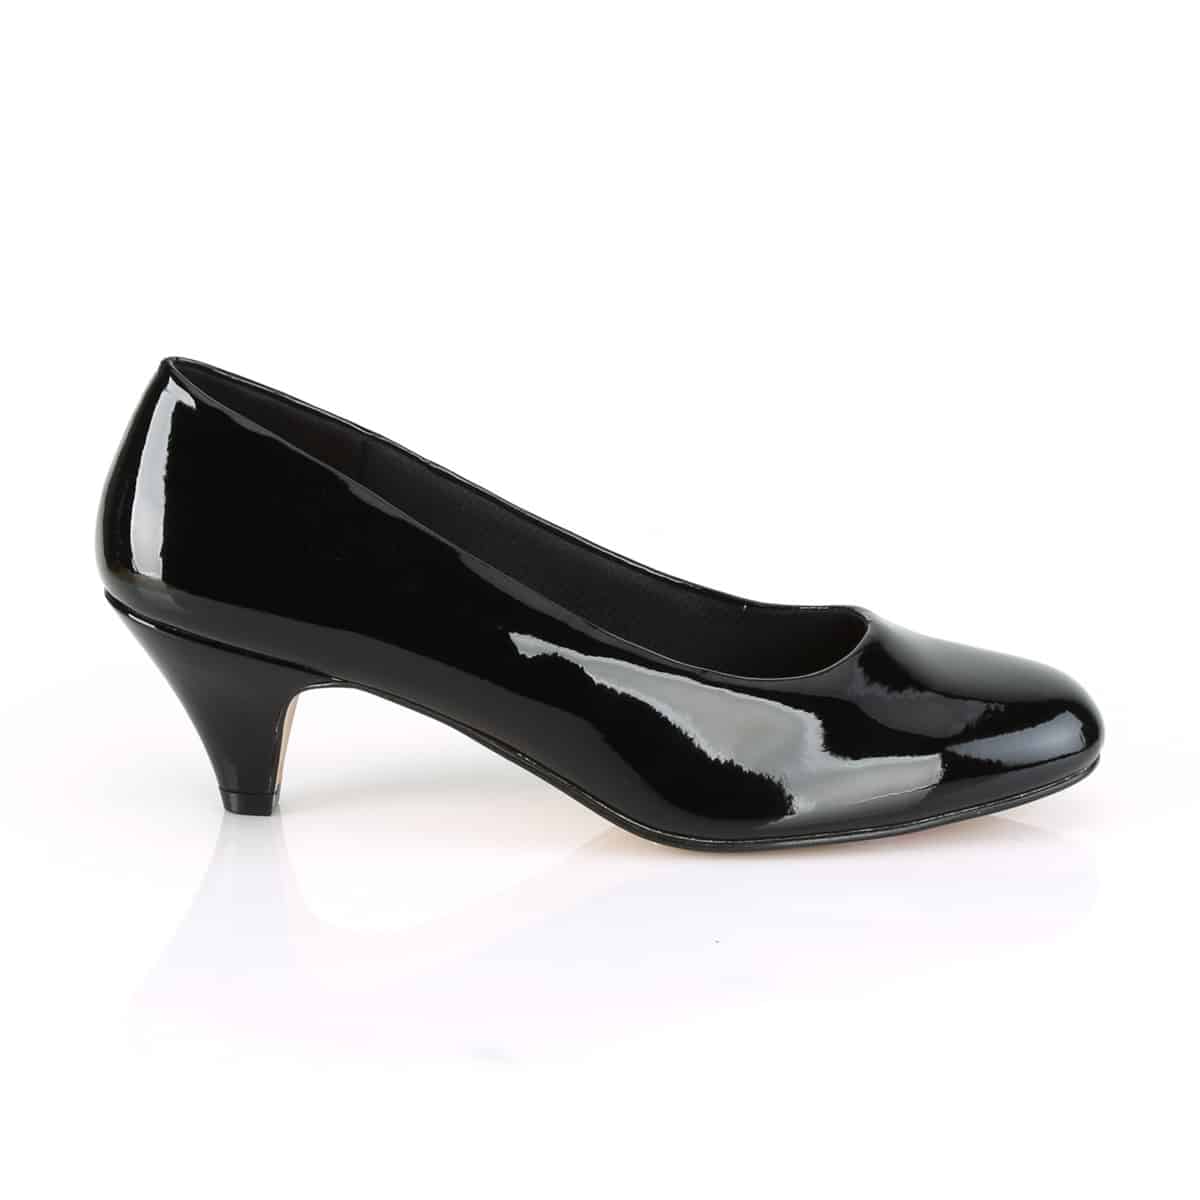 Classic Pump with Short Heel - Glamour 